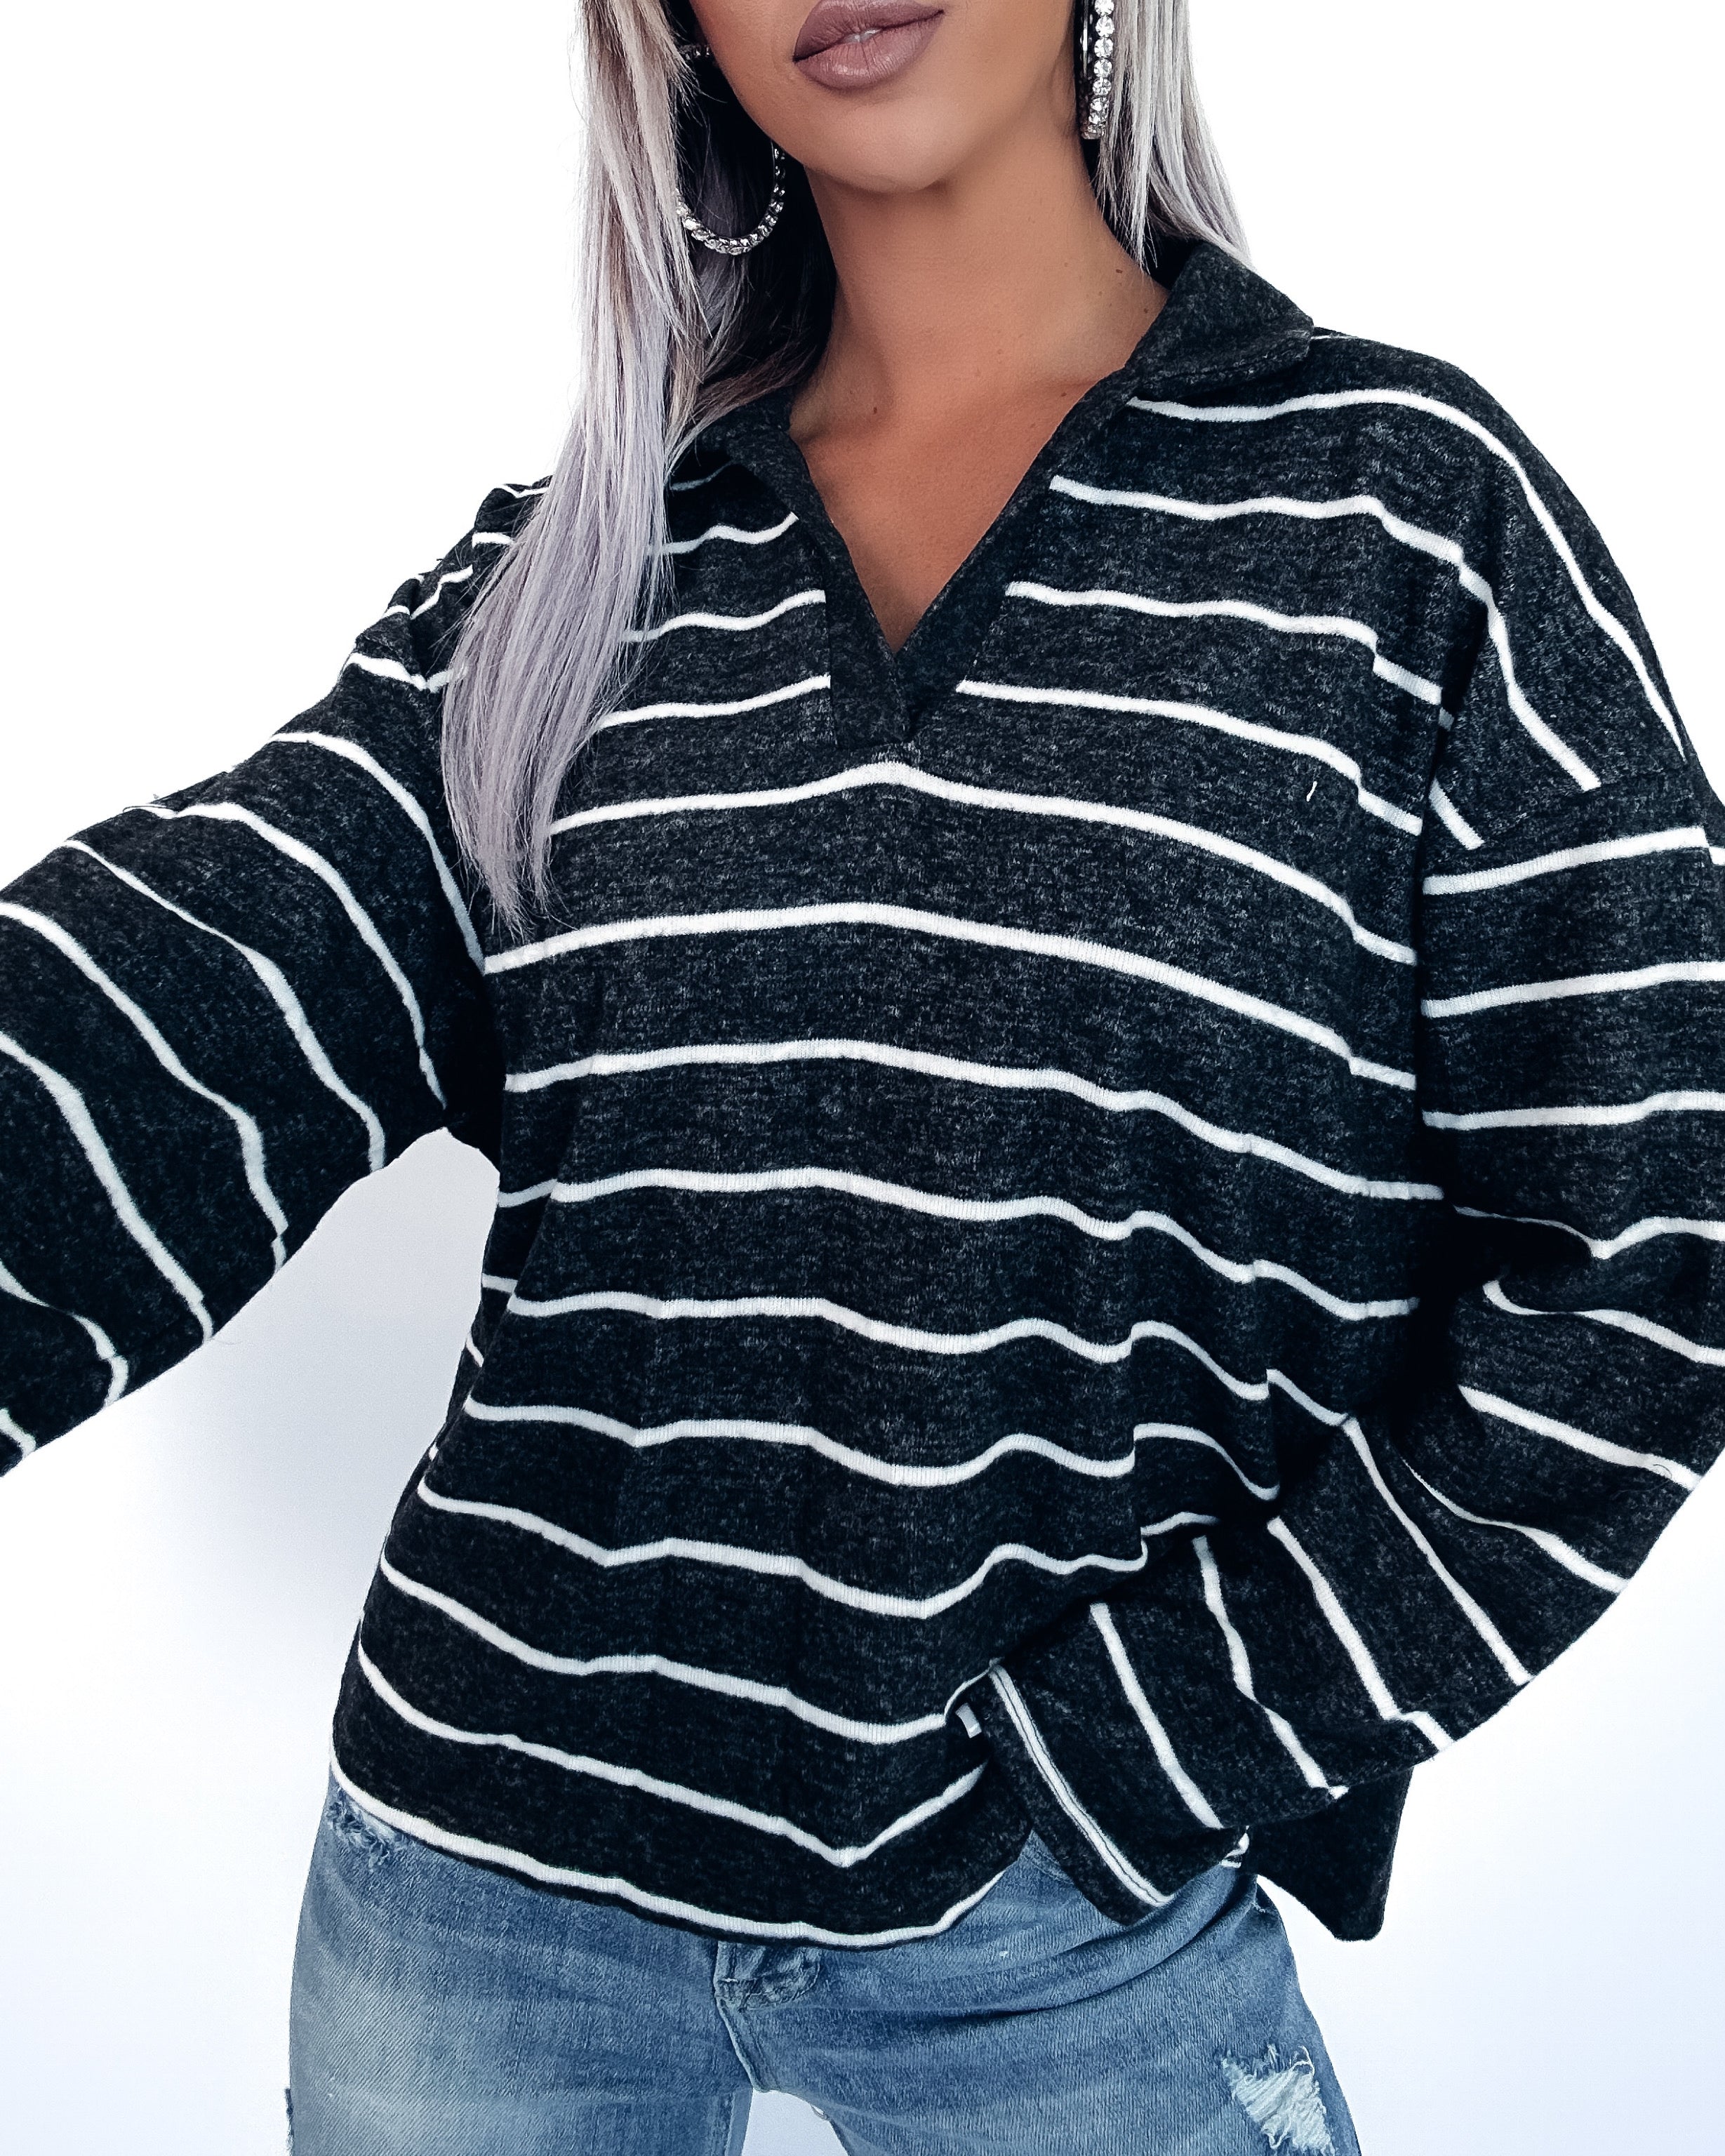 Come With Me Striped Sweater- Black